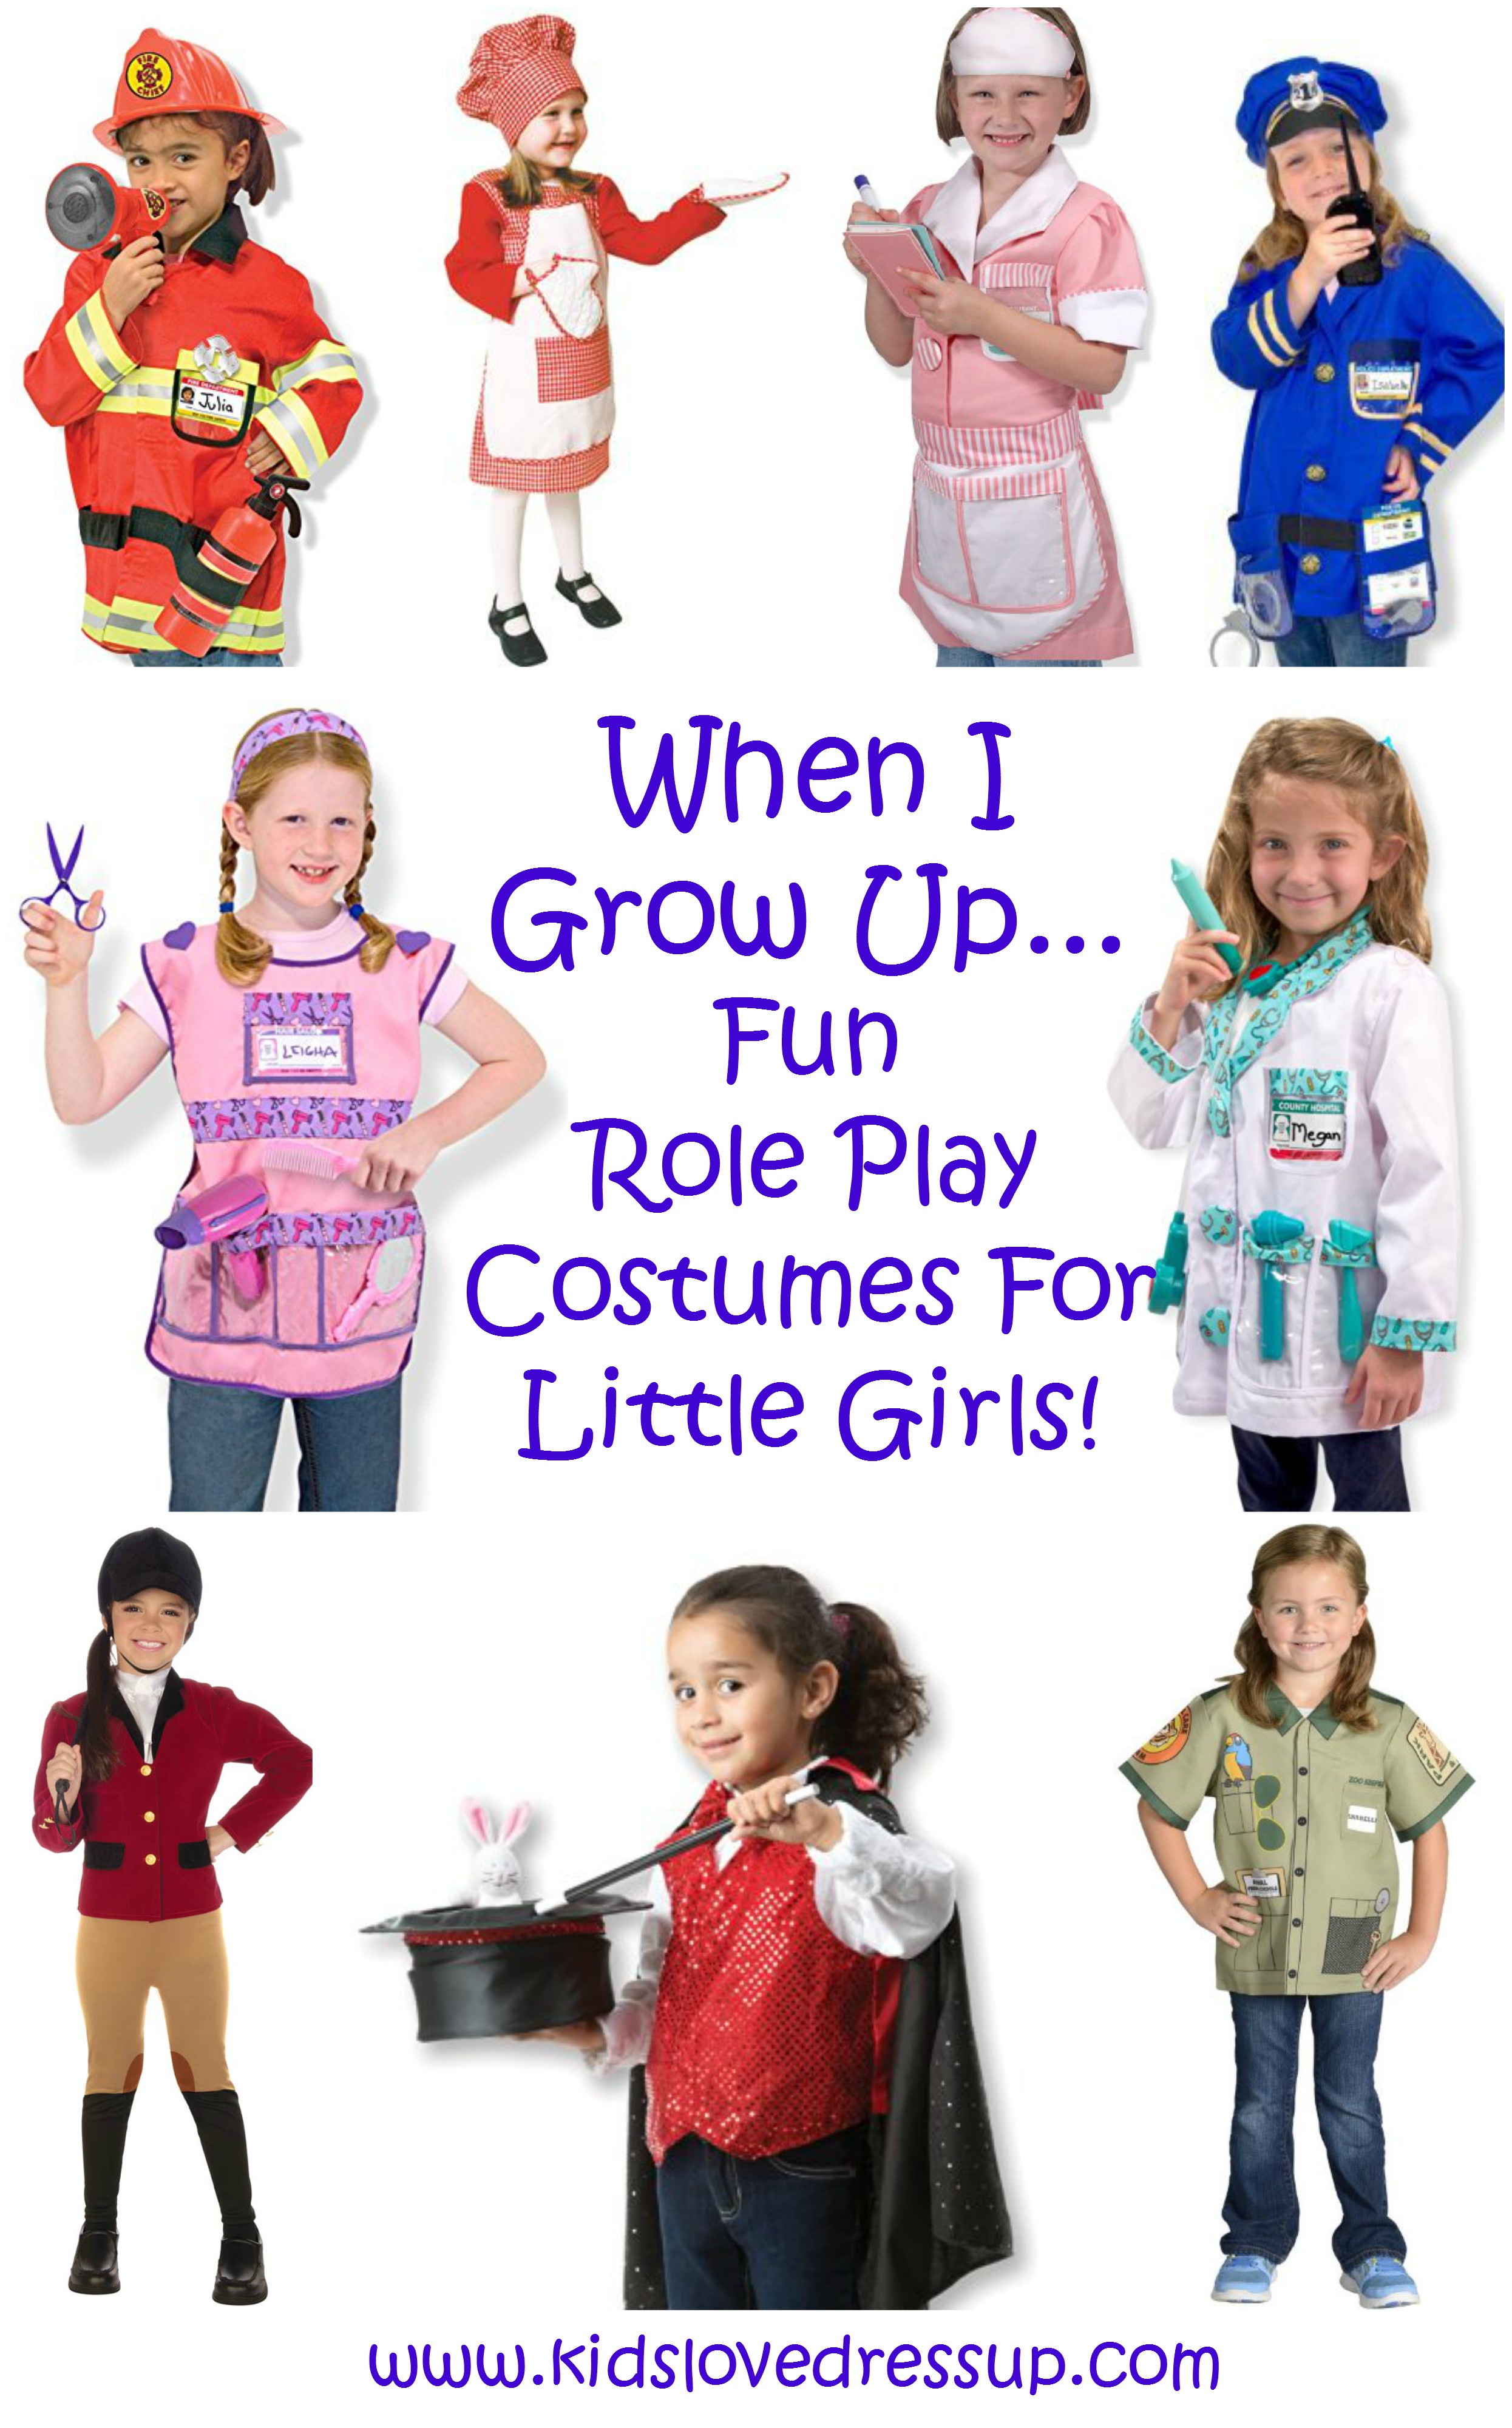 Fun role play costumes for girls, all about "When I Grow Up"! Kidslovedressup.com